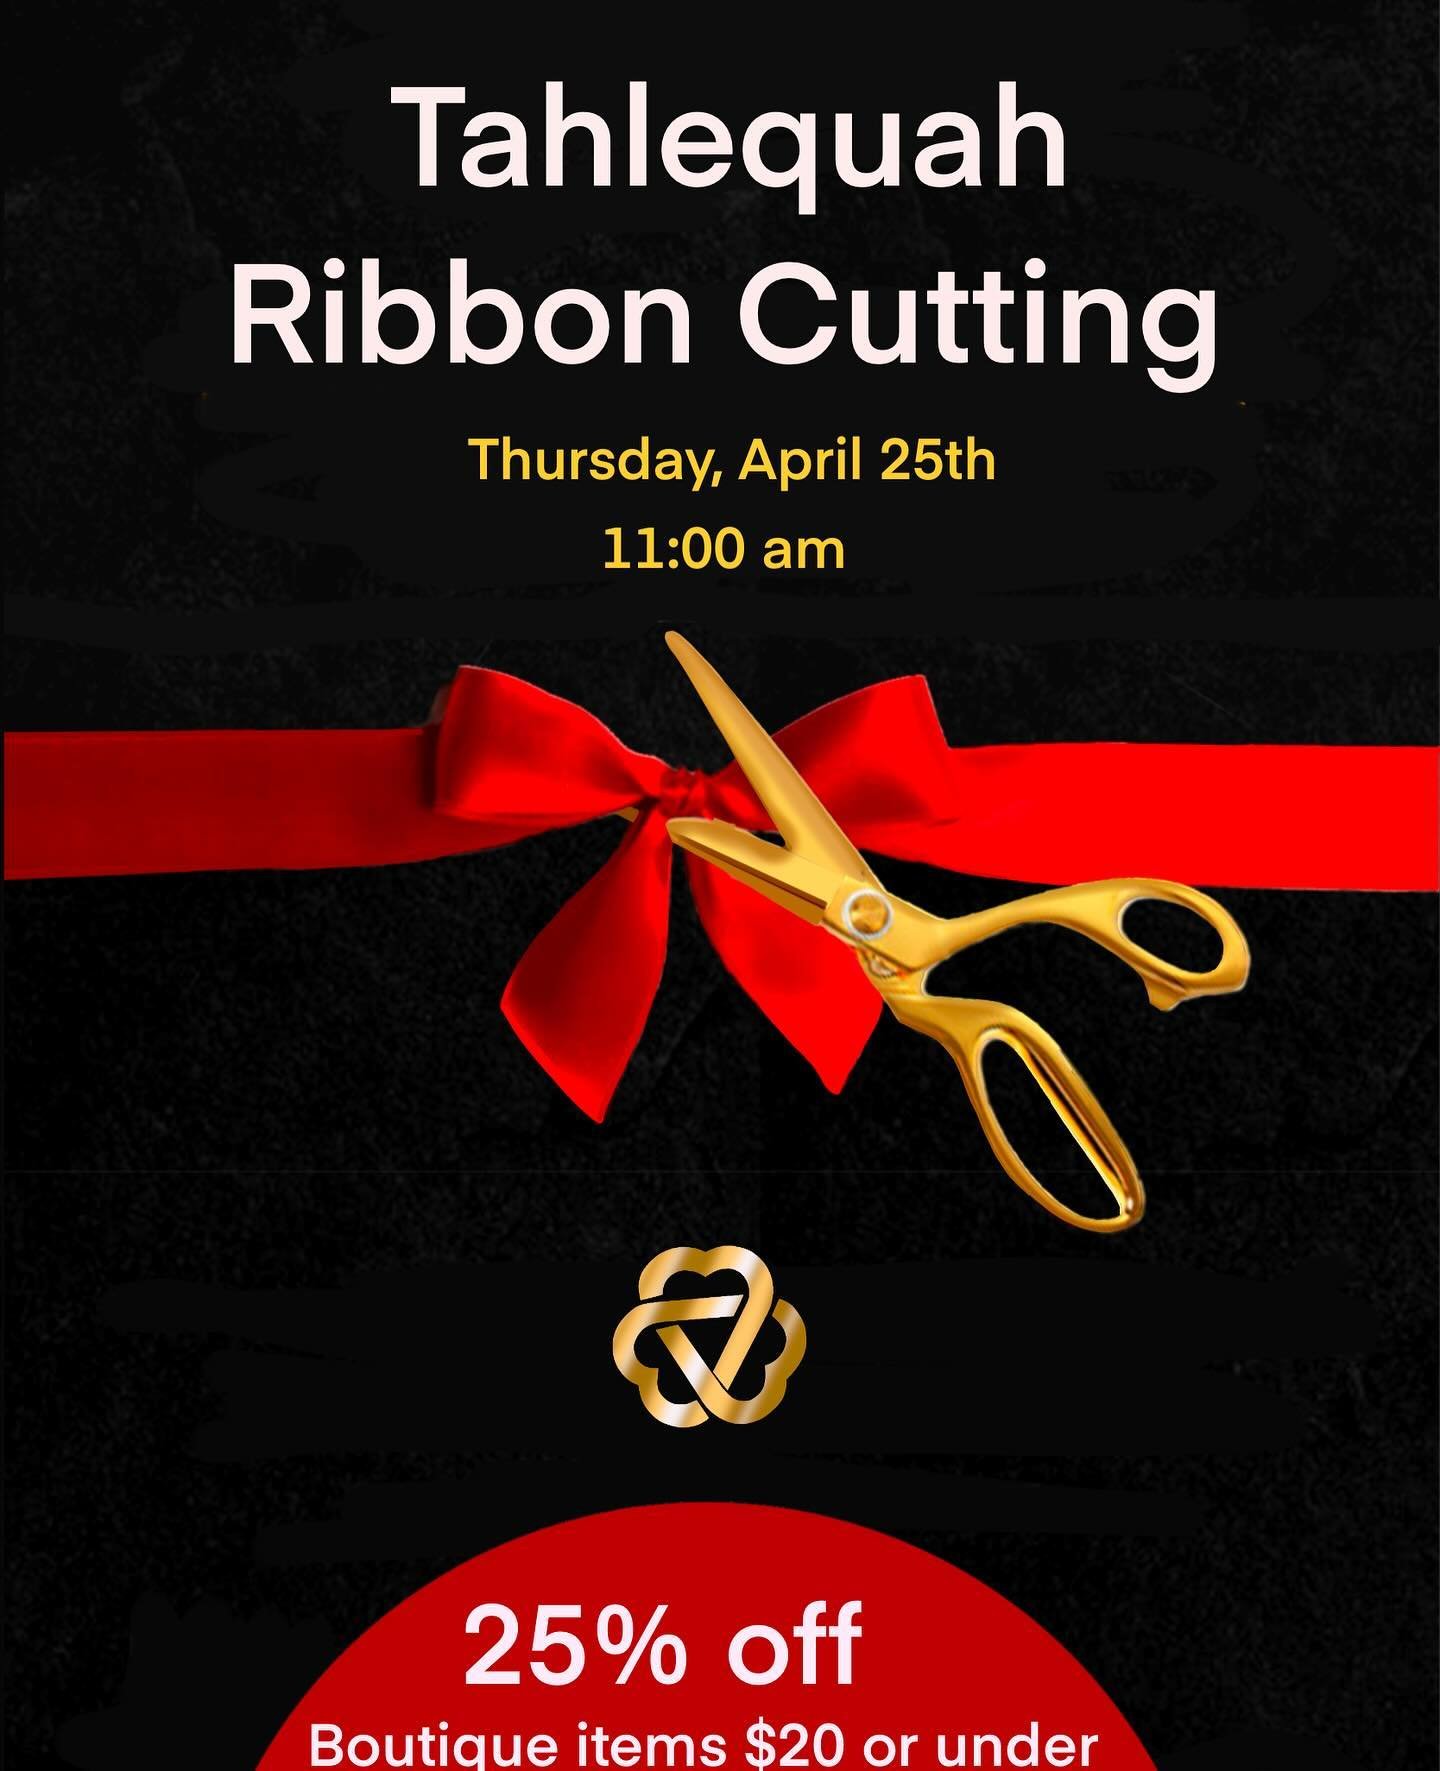 Come by and join us for our ribbon cutting ceremony with @tahlequahchamber today!